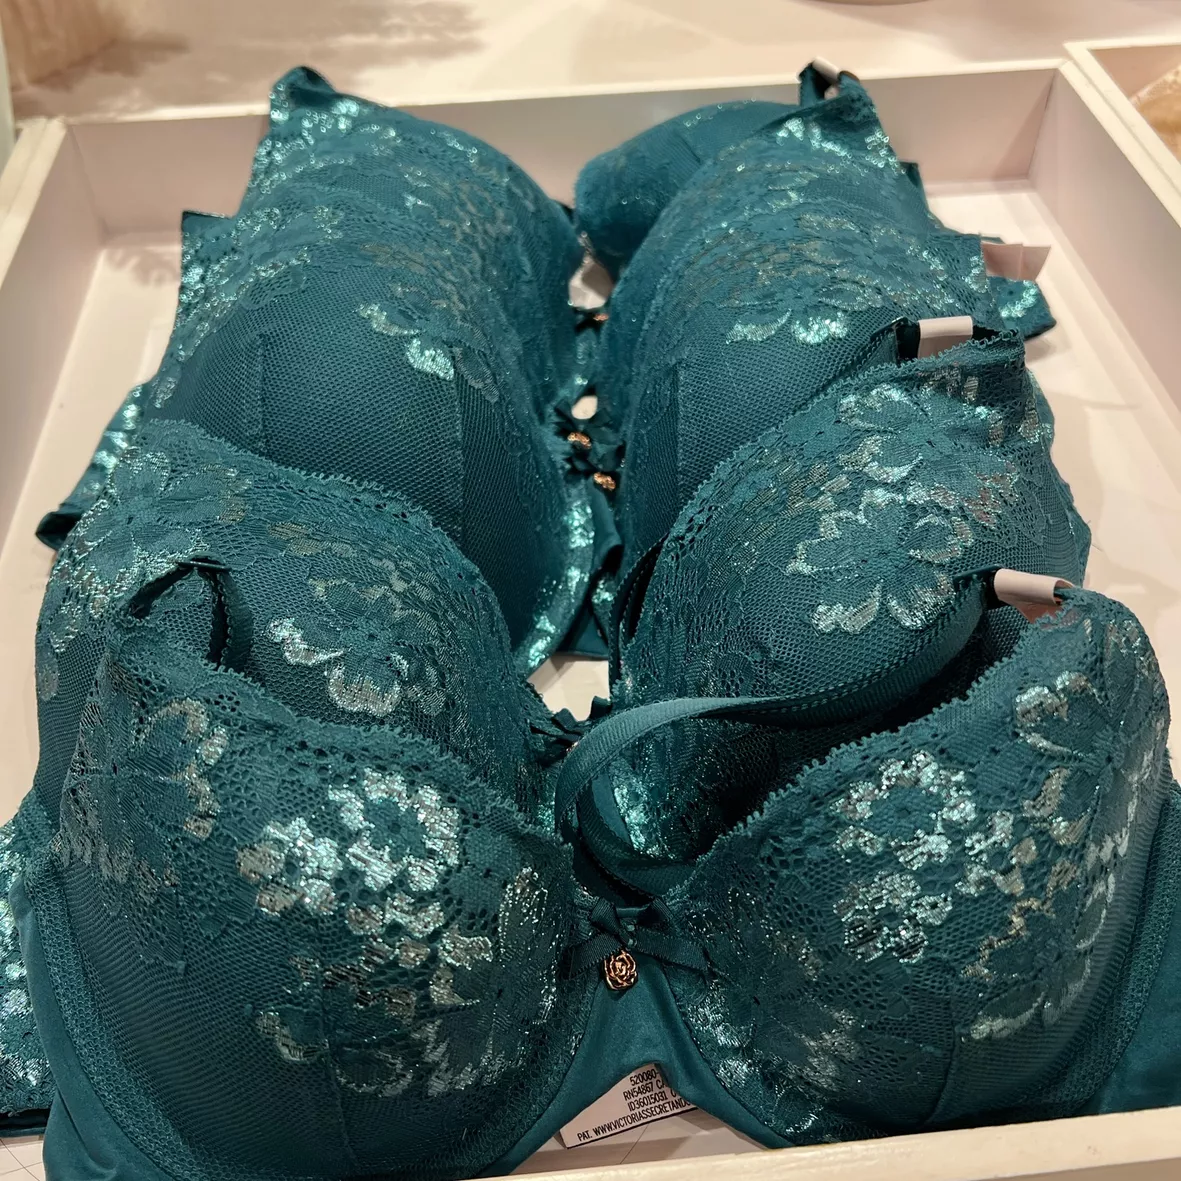 Lace Lightly Lined Demi Bra